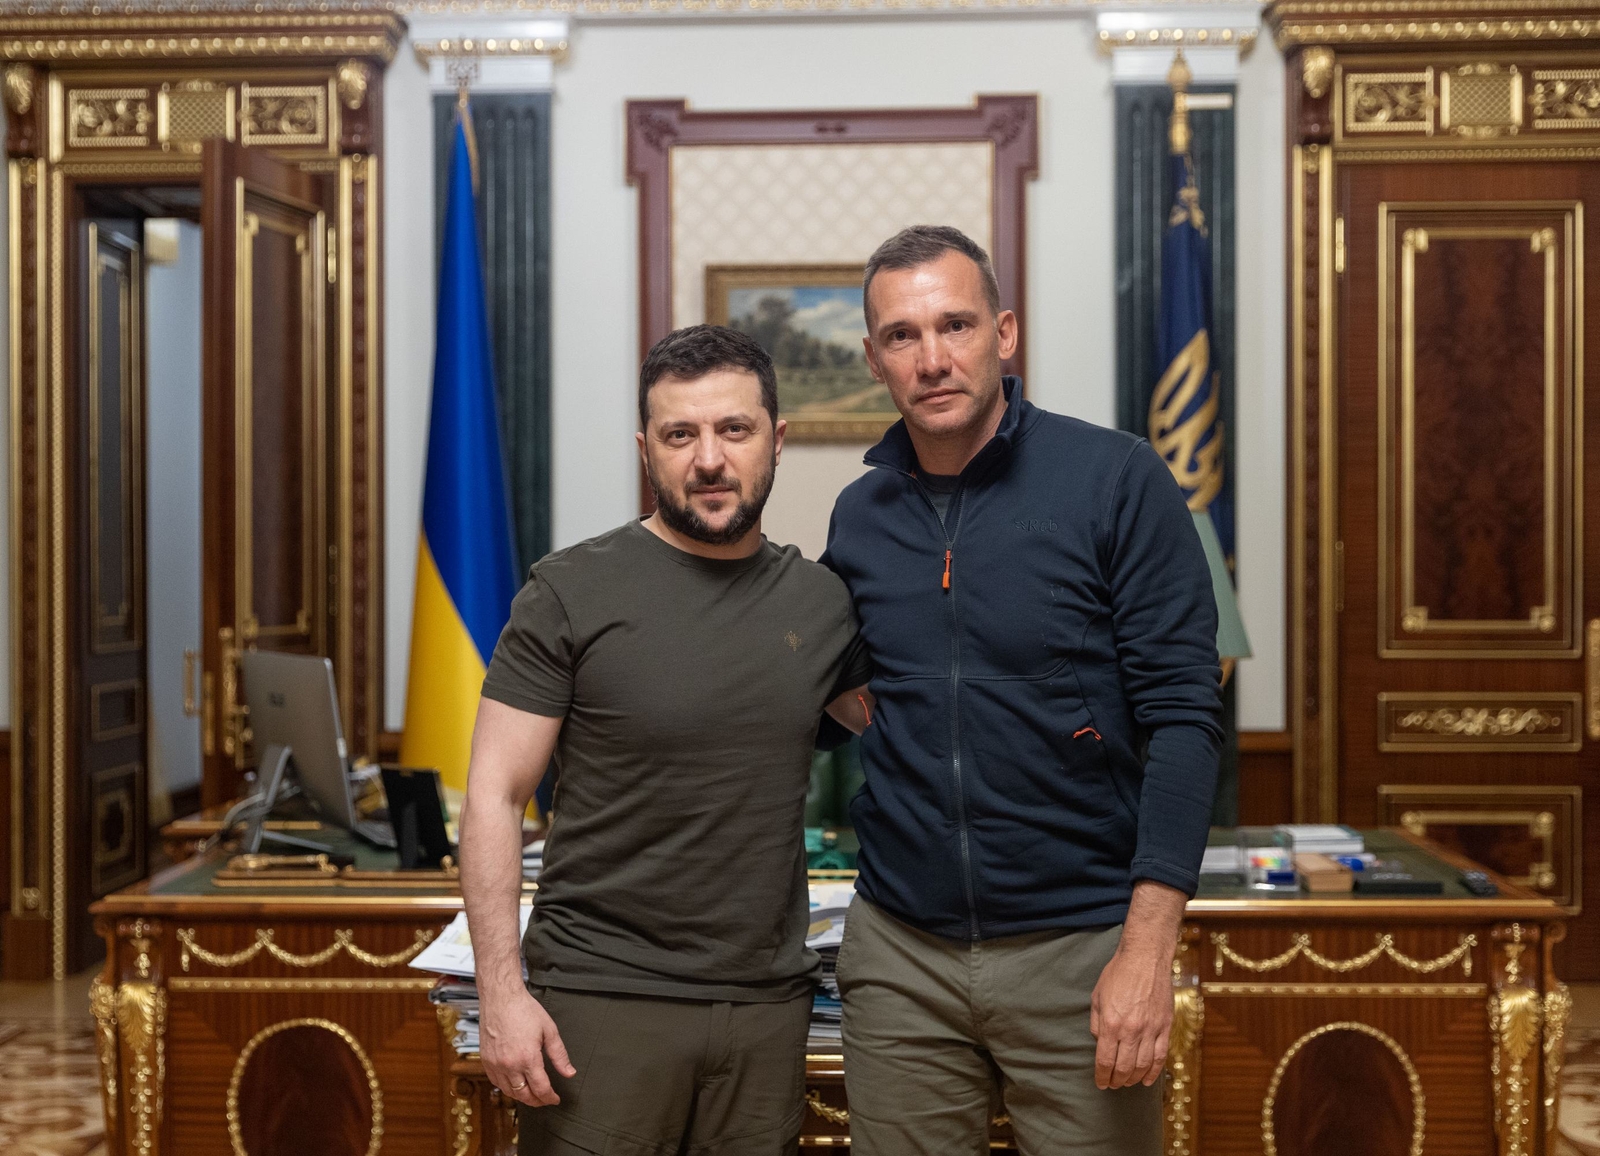 Andriy Shevchenko Became the First Ambassador for the UNITED24 Fundraising Platform. He will Focus on Medical Aid Direction